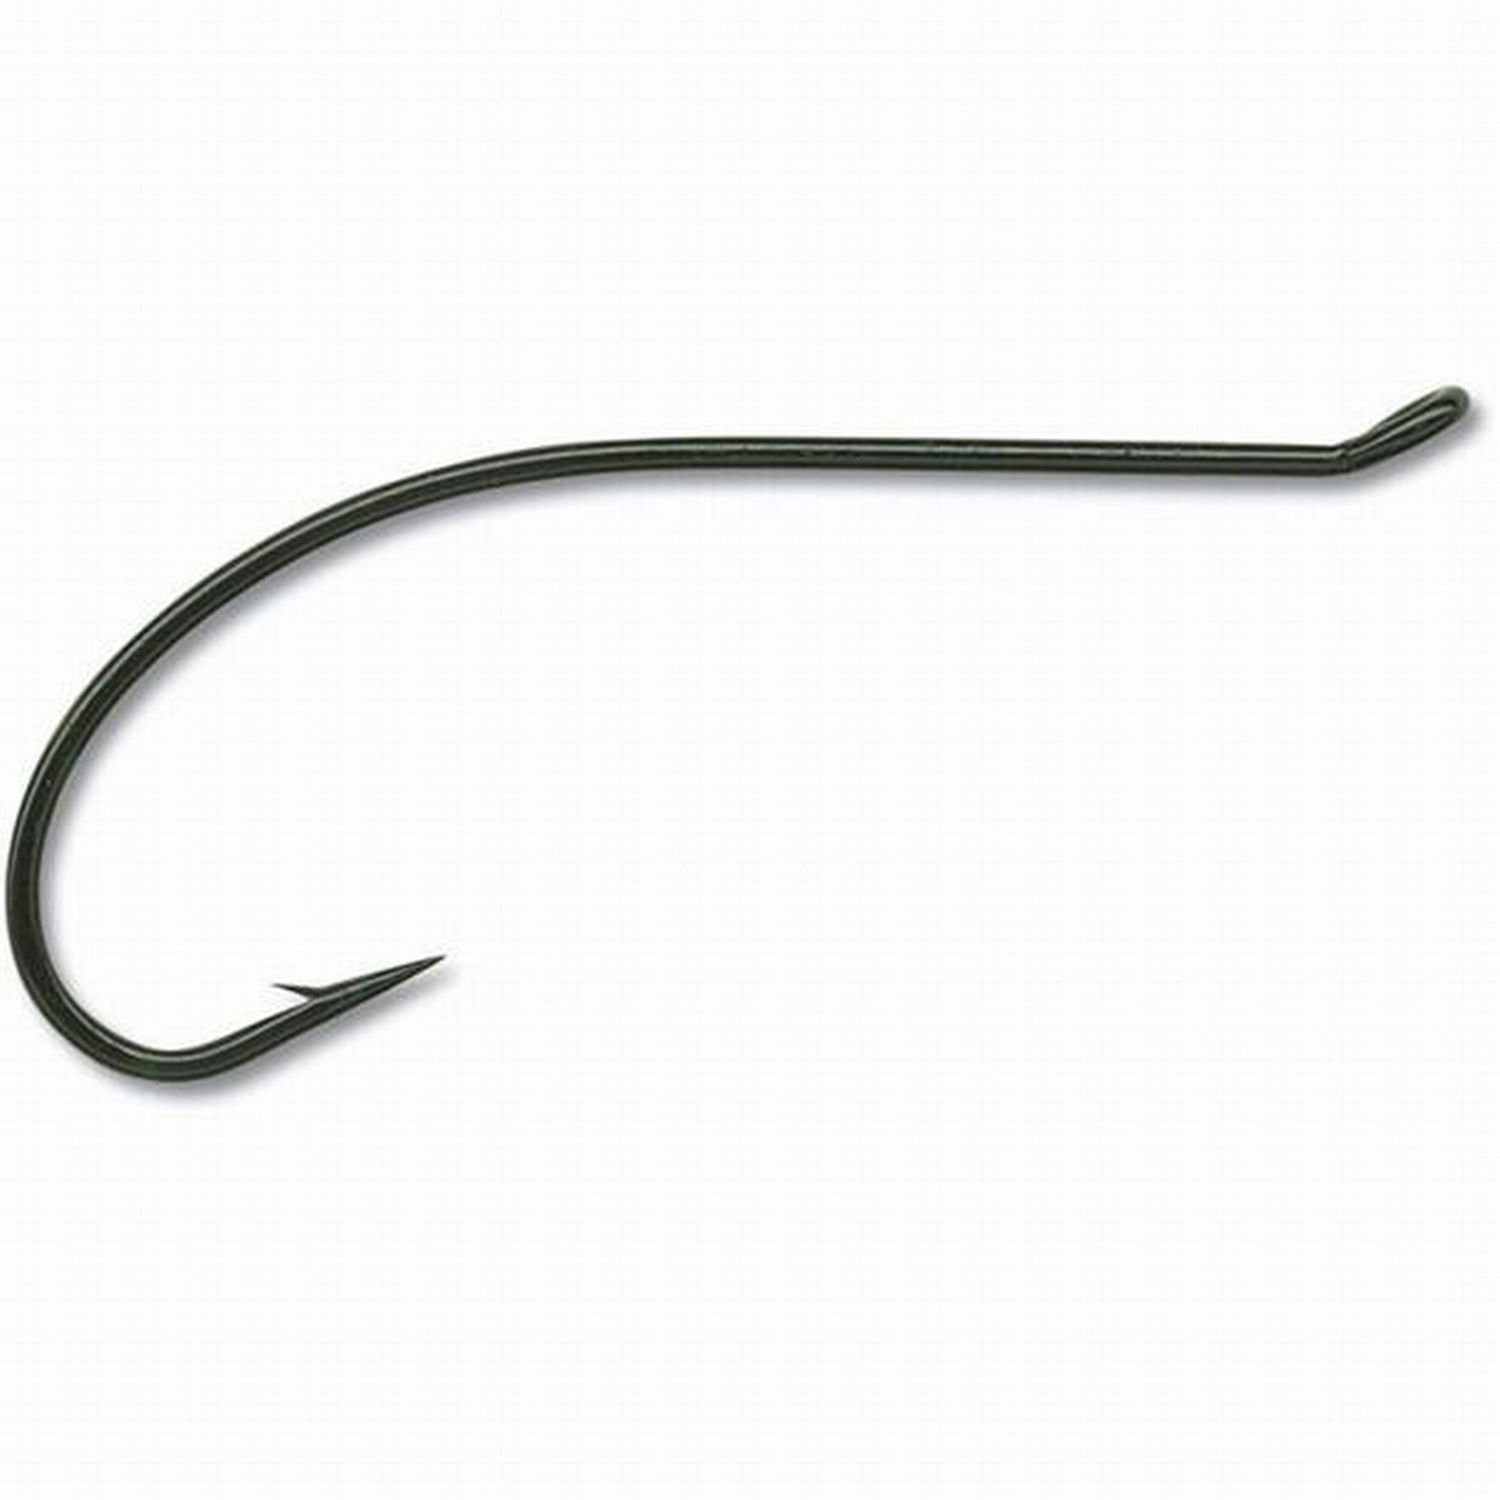 download the new for apple Fishing Hook